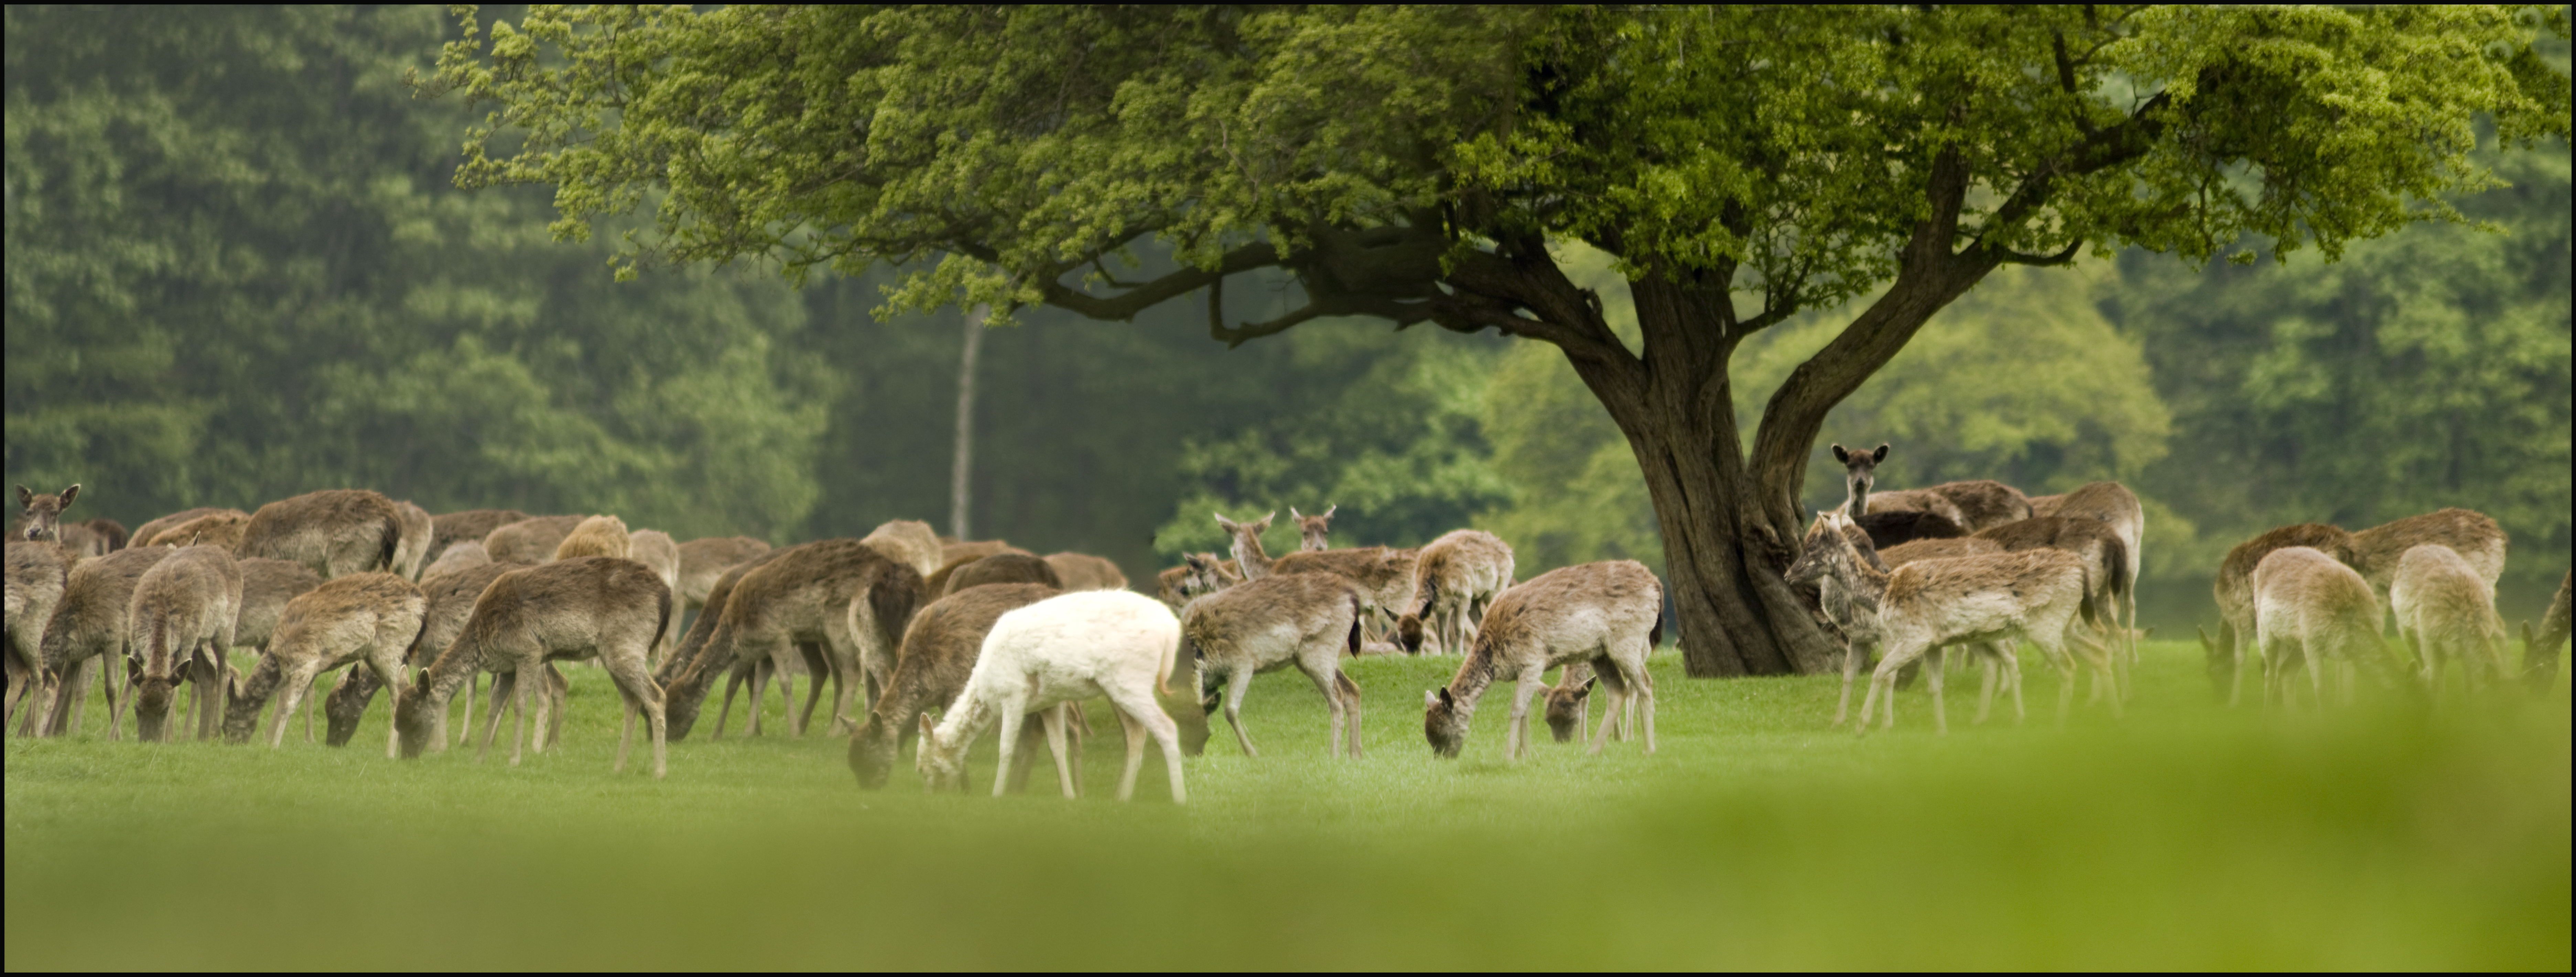 A herd of deer grazing in a field surrounded by trees